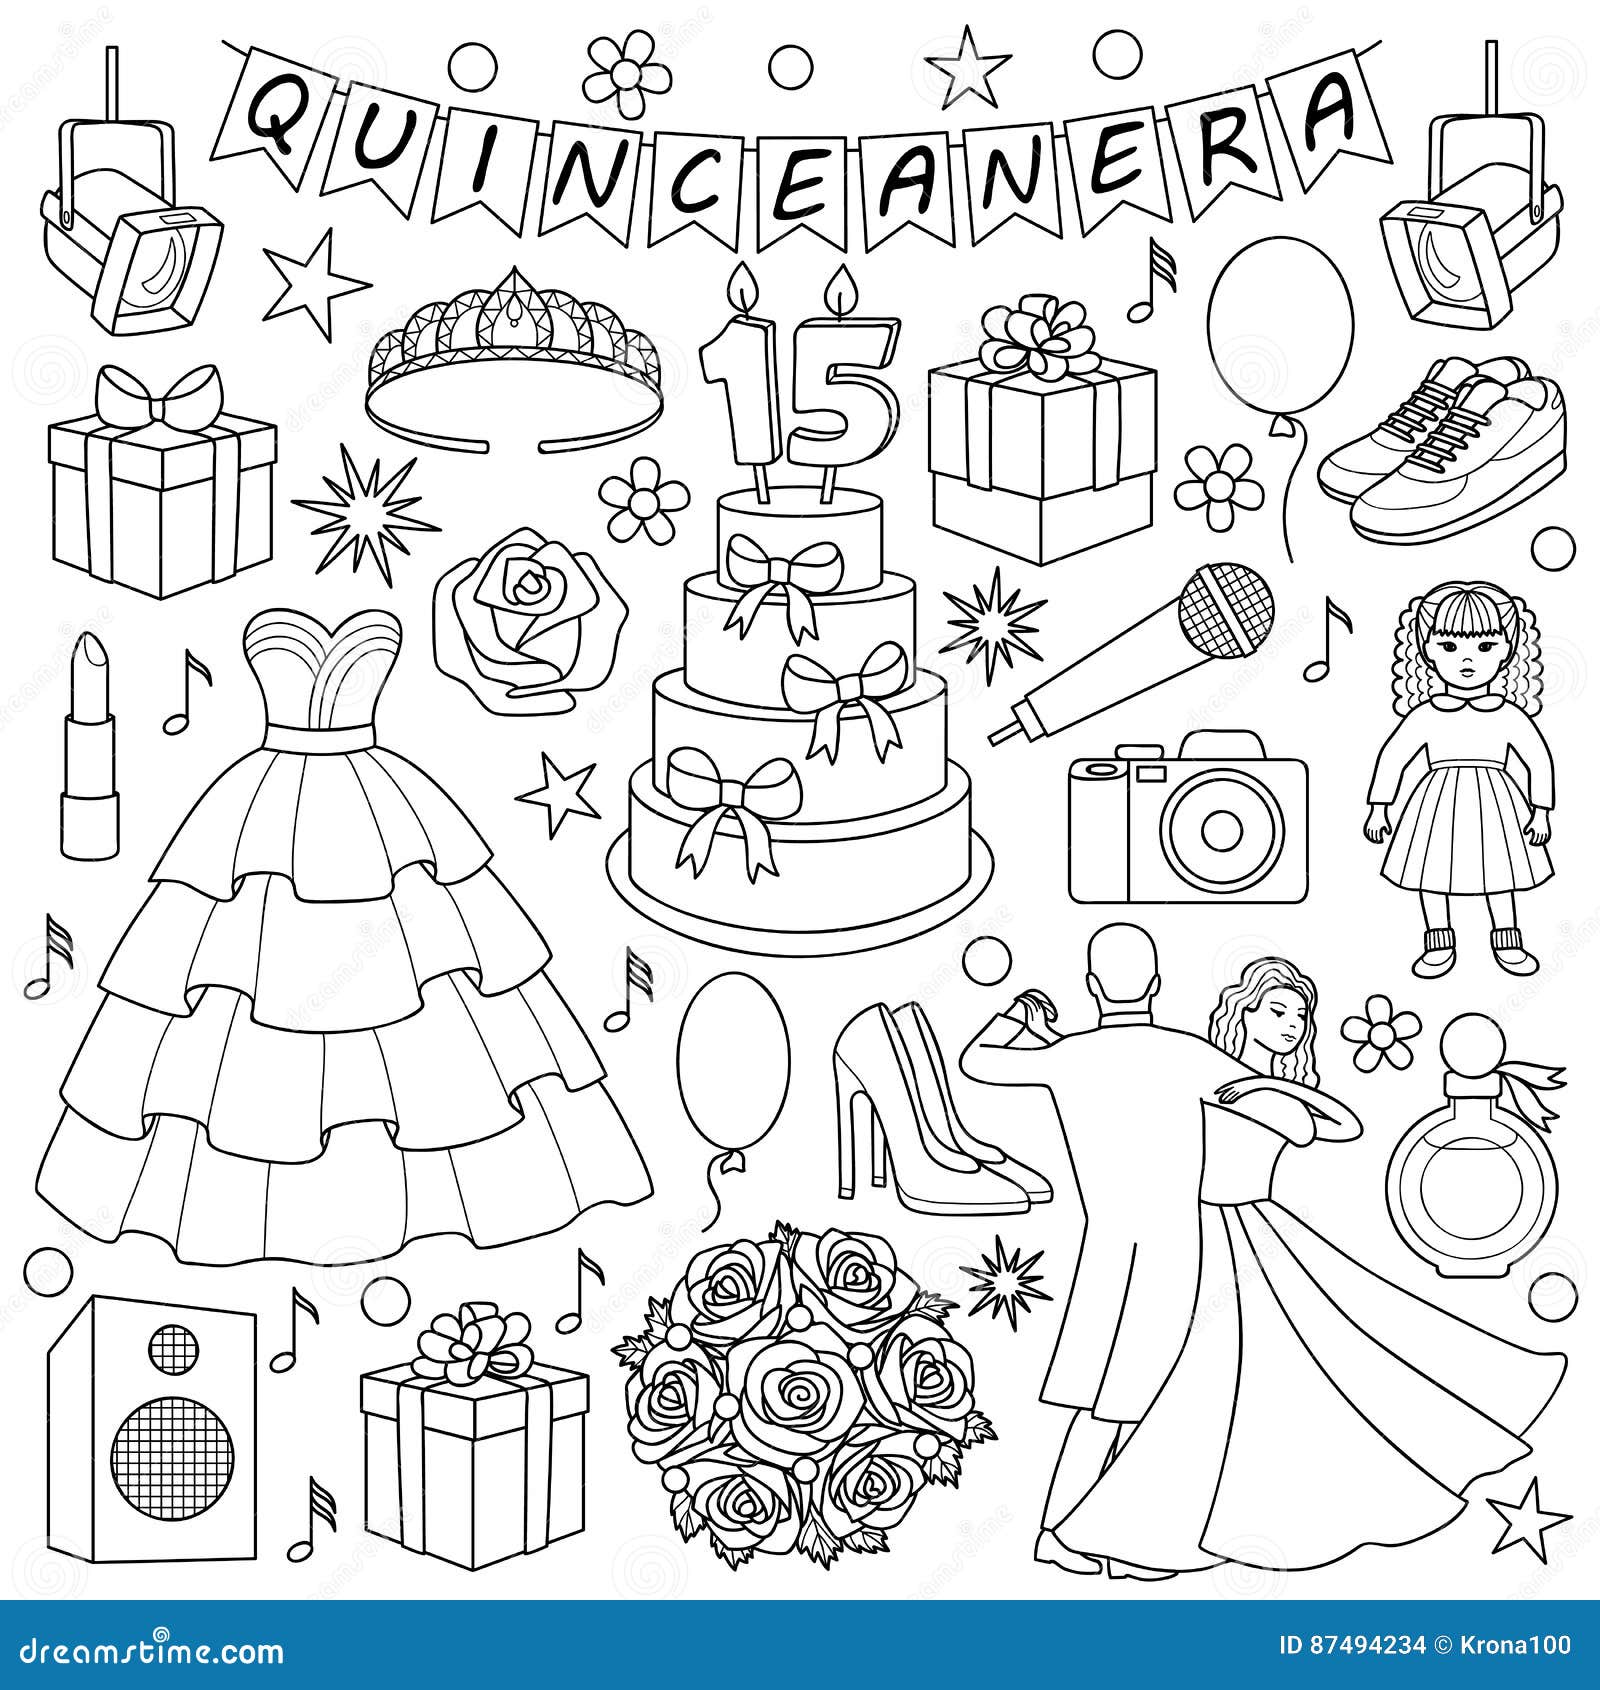 Quinceanera doodle set stock vector illustration of object